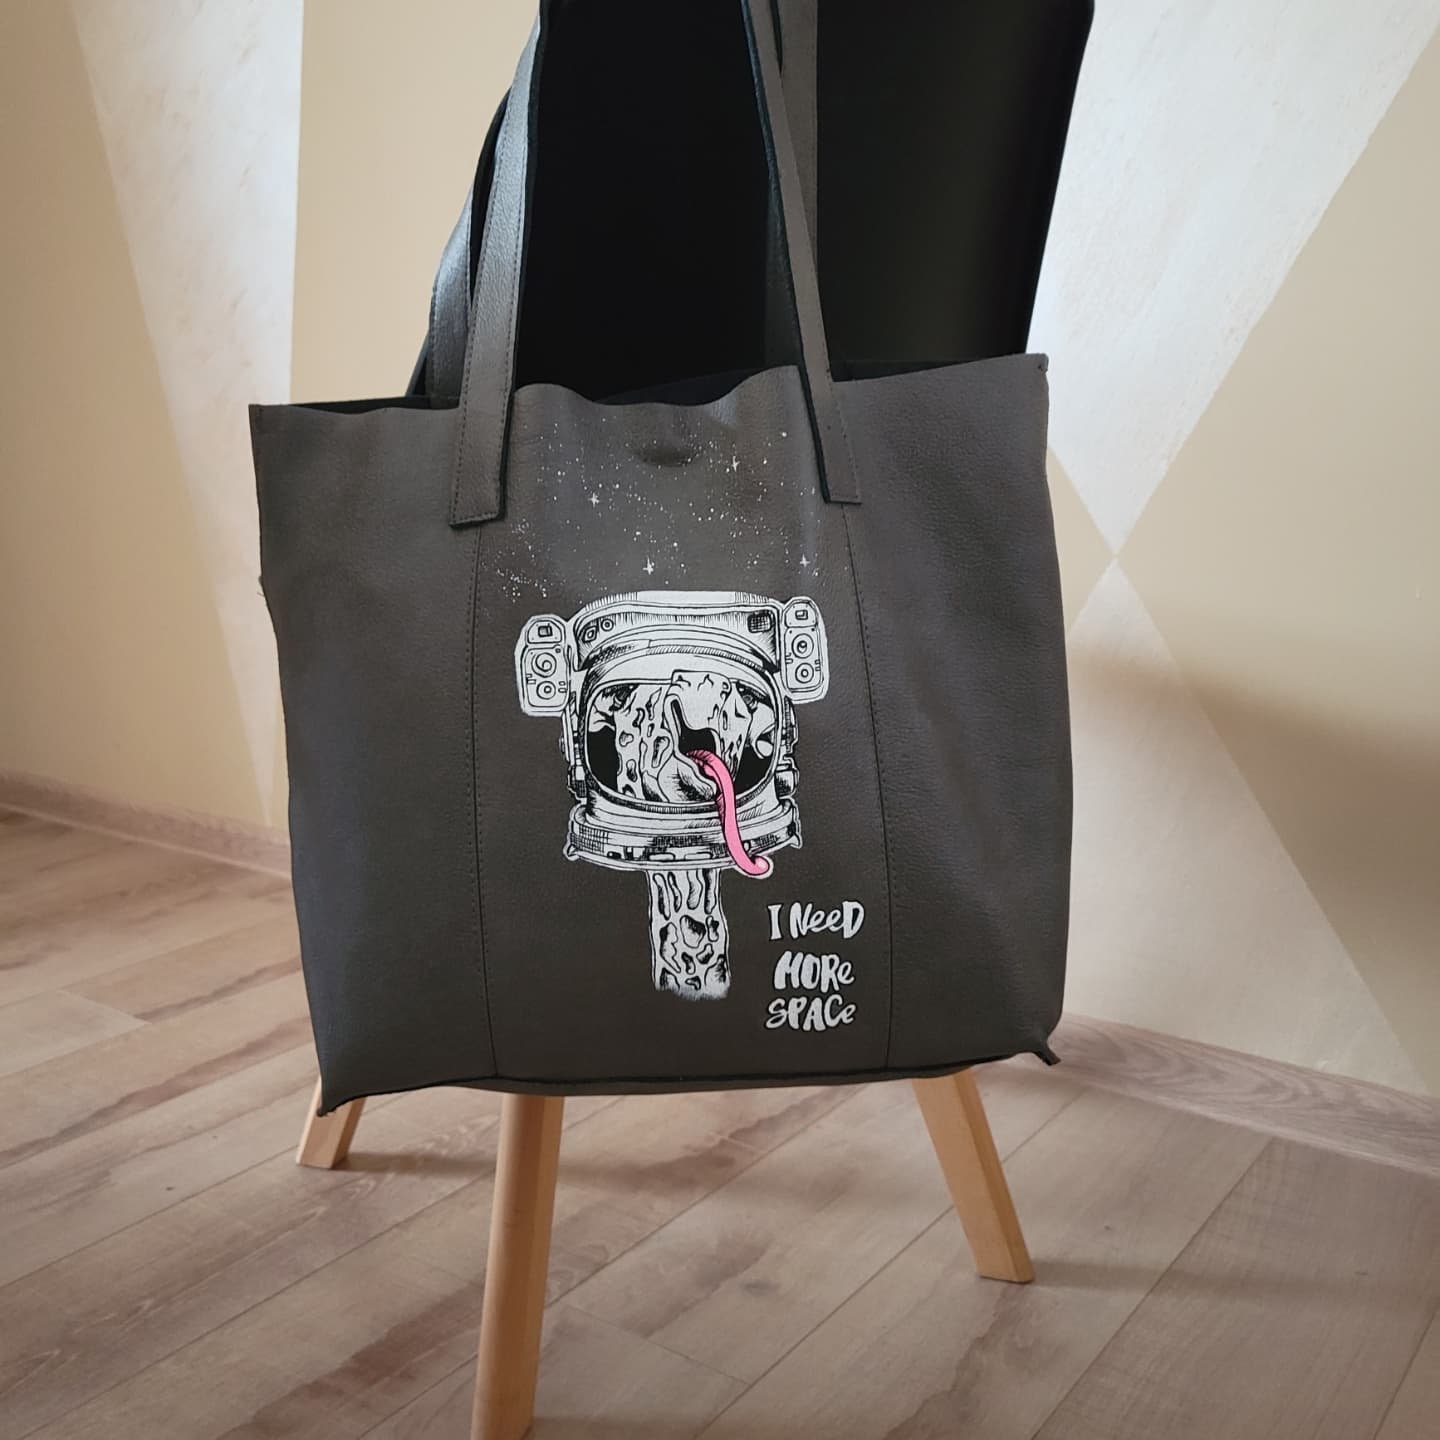 Hand Painted Bag Pop Art Bag Painted Shopping Bag Gift for 